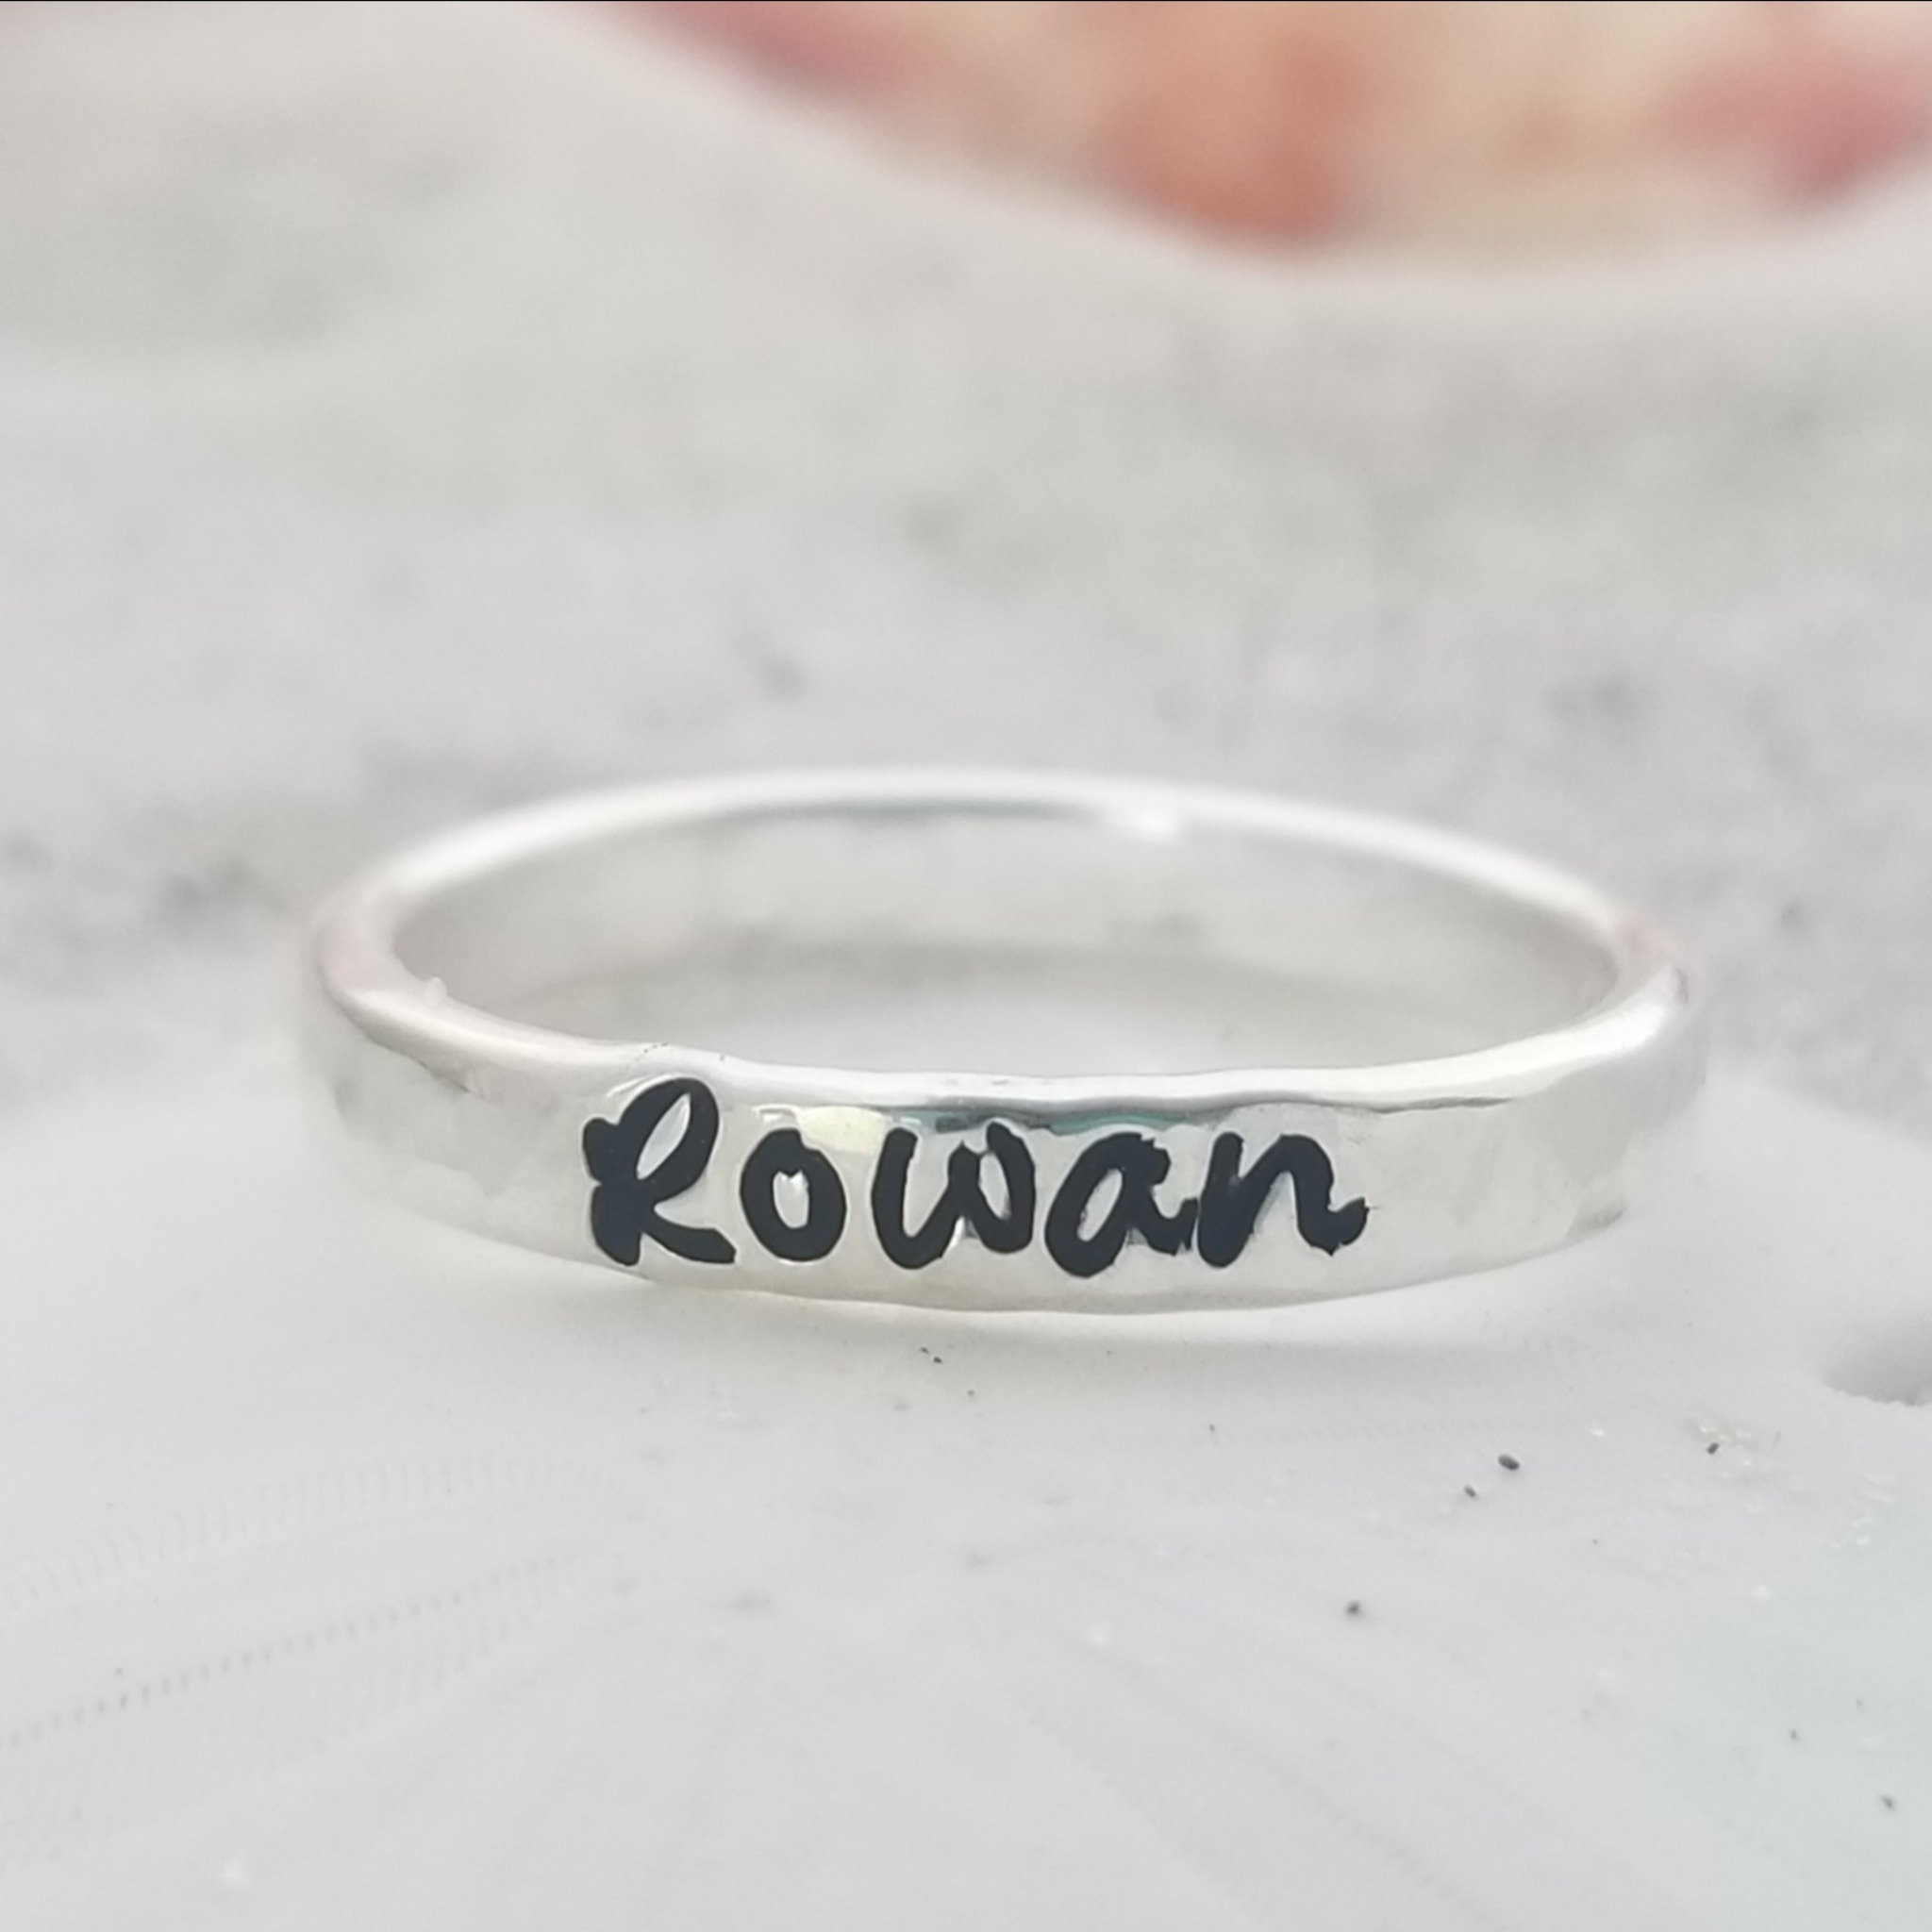 Stackable Name Rings | Stackable name rings, Name rings, Mothers ring  stackable